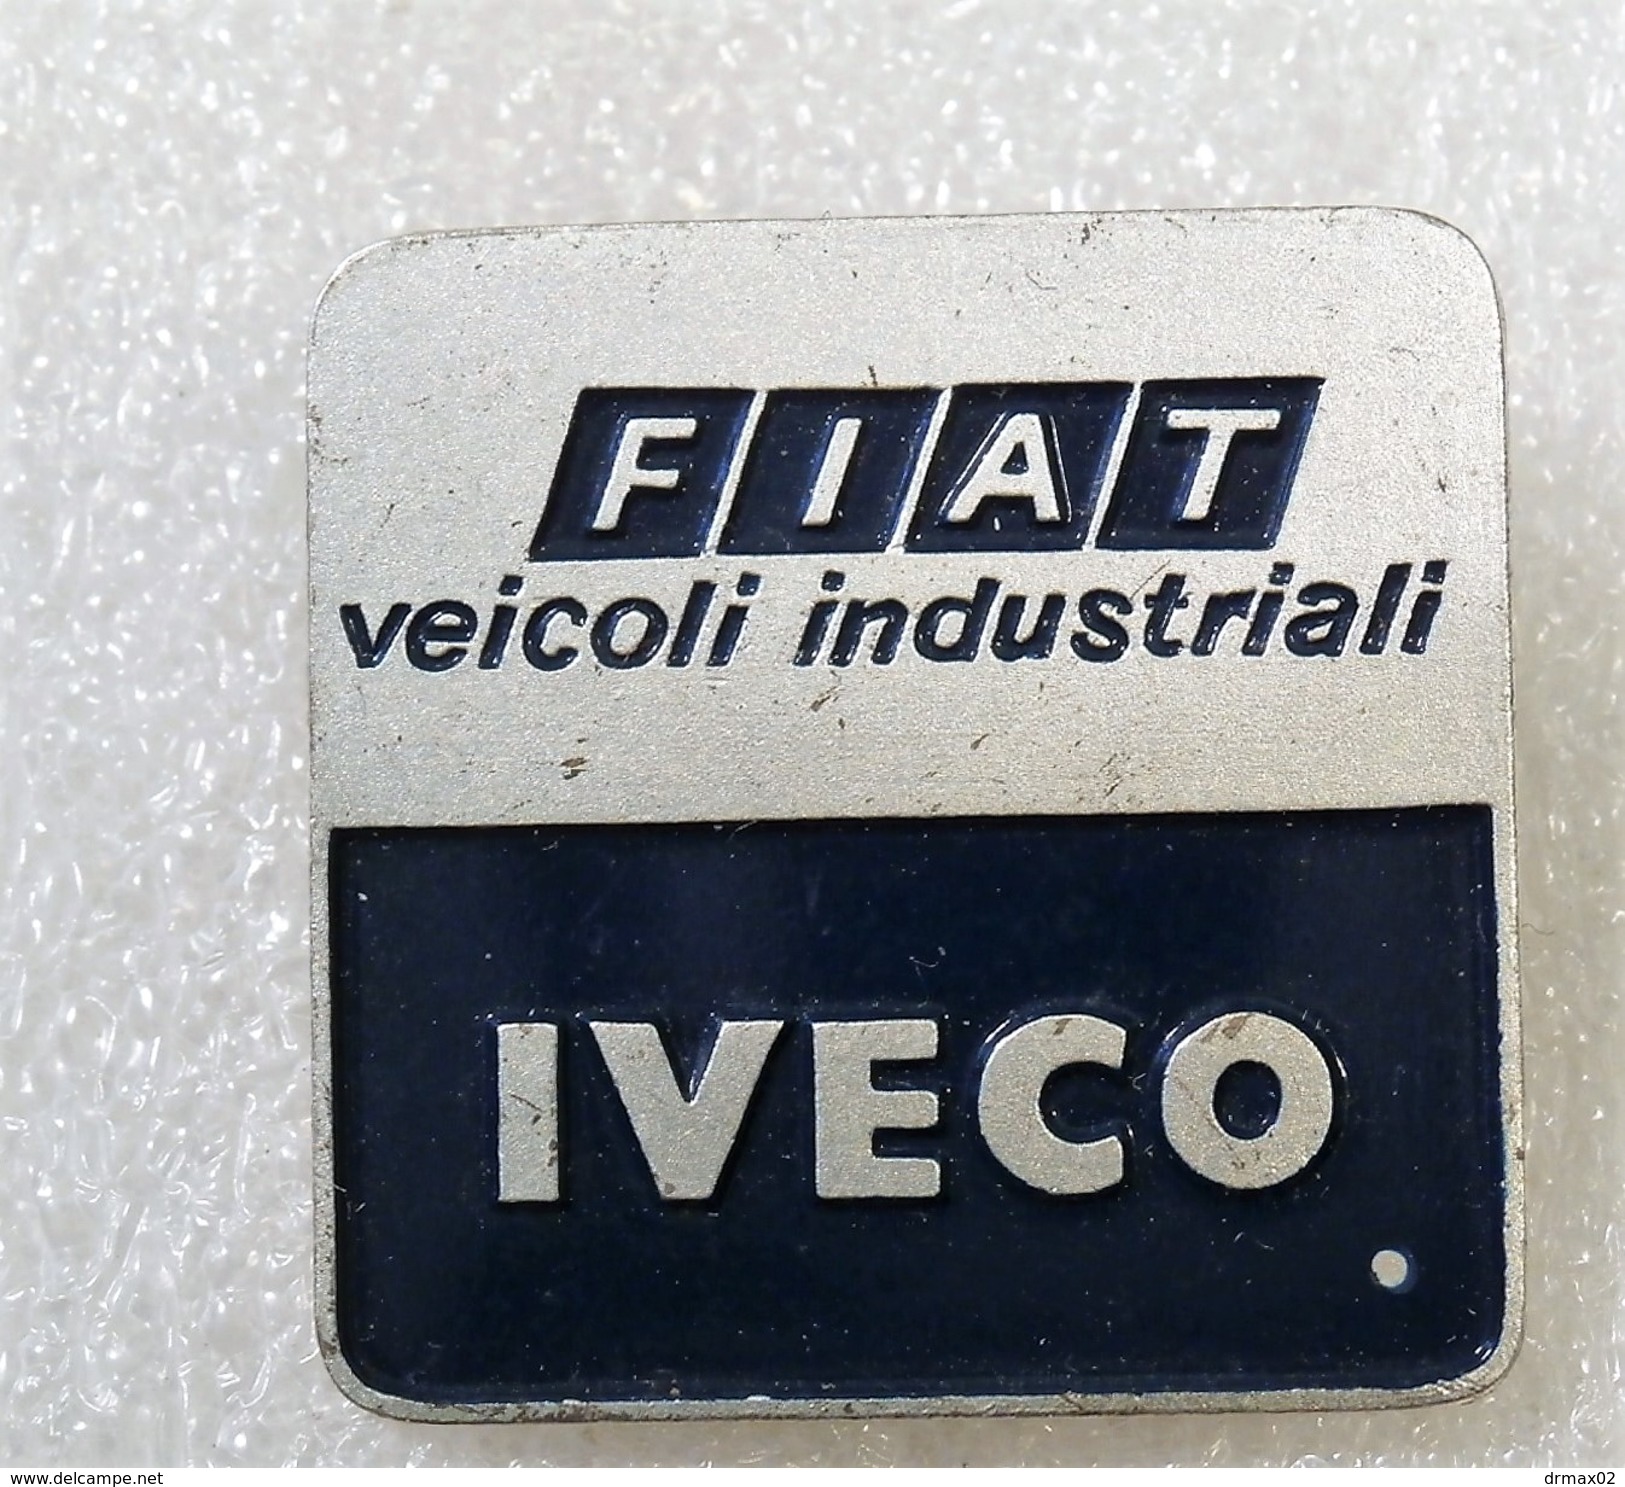 FIAT IVECO Auto Industry  Italy- Trucks, LKW, Camion, Vehicle Car / Pin Badge Abzeichen - Fiat